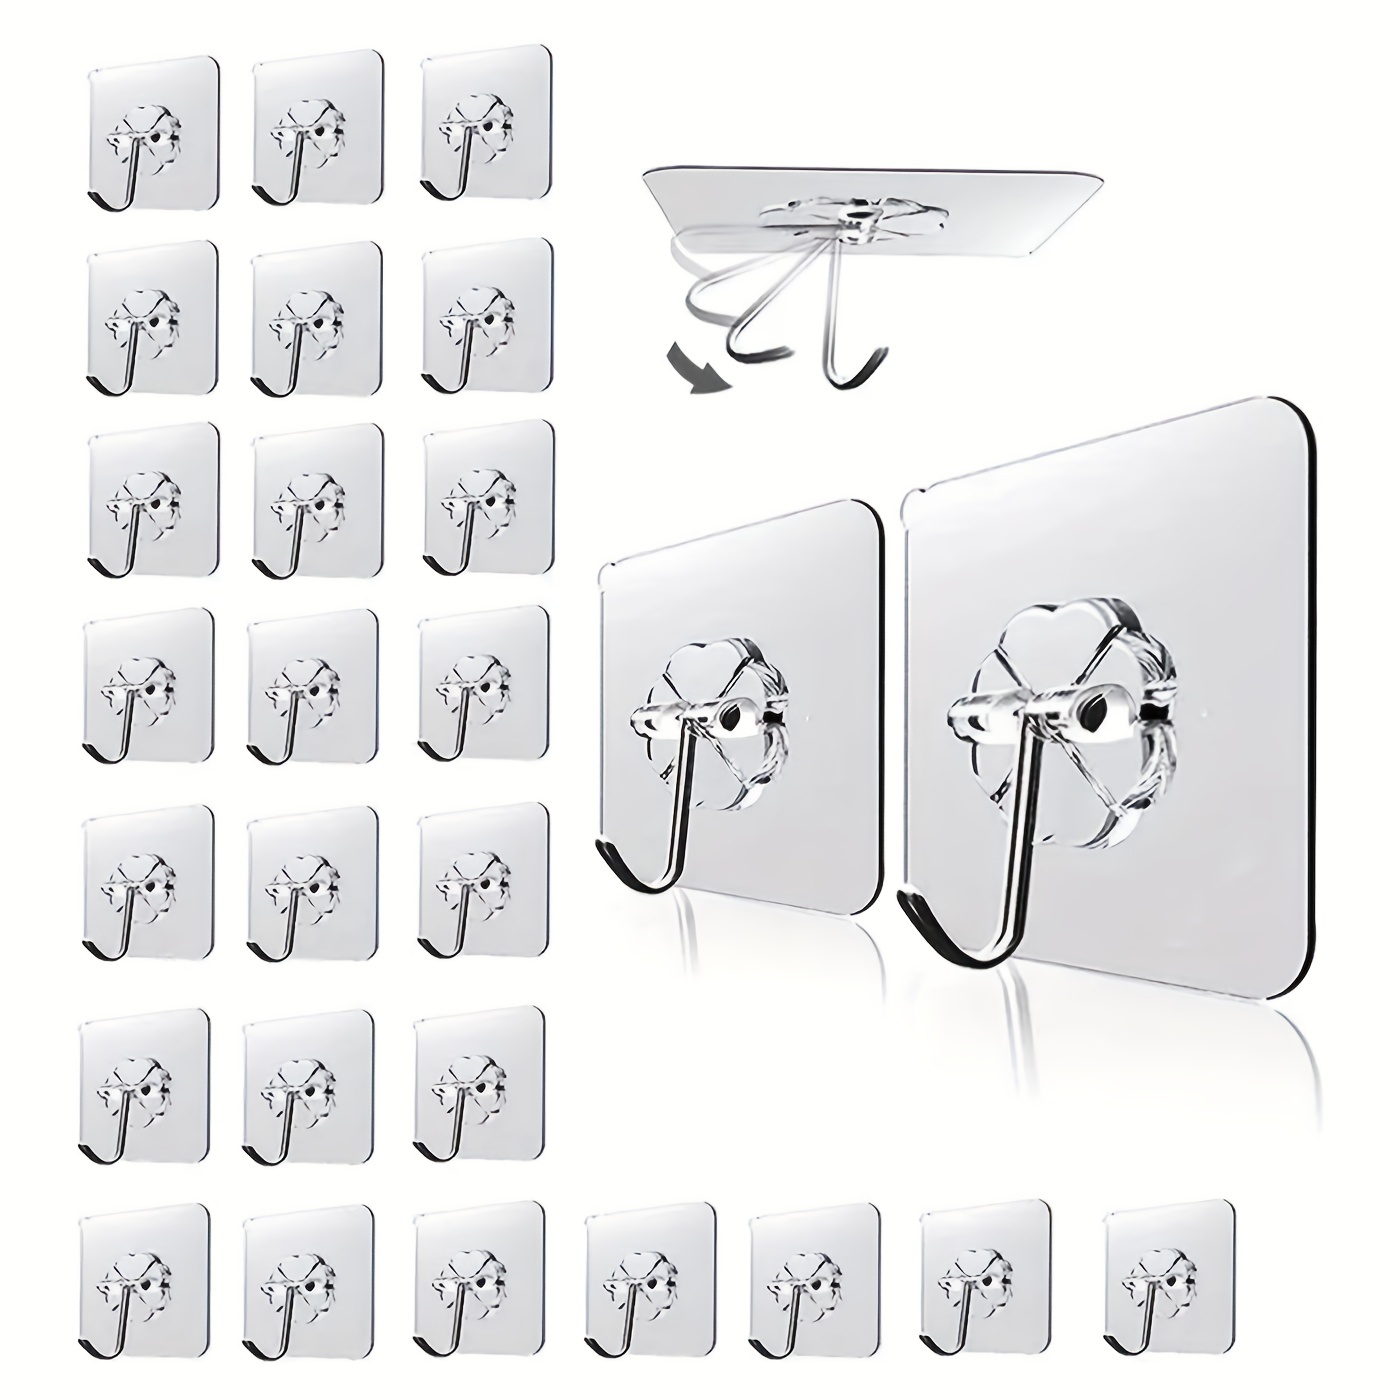 12 Packs Adhesive Hooks For Hanging Heavy Duty Wall Hooks 22 Lbs Self  Adhesive Sticky Hooks Waterproof Transparent Hooks For Keys Bathroom Shower  Outd